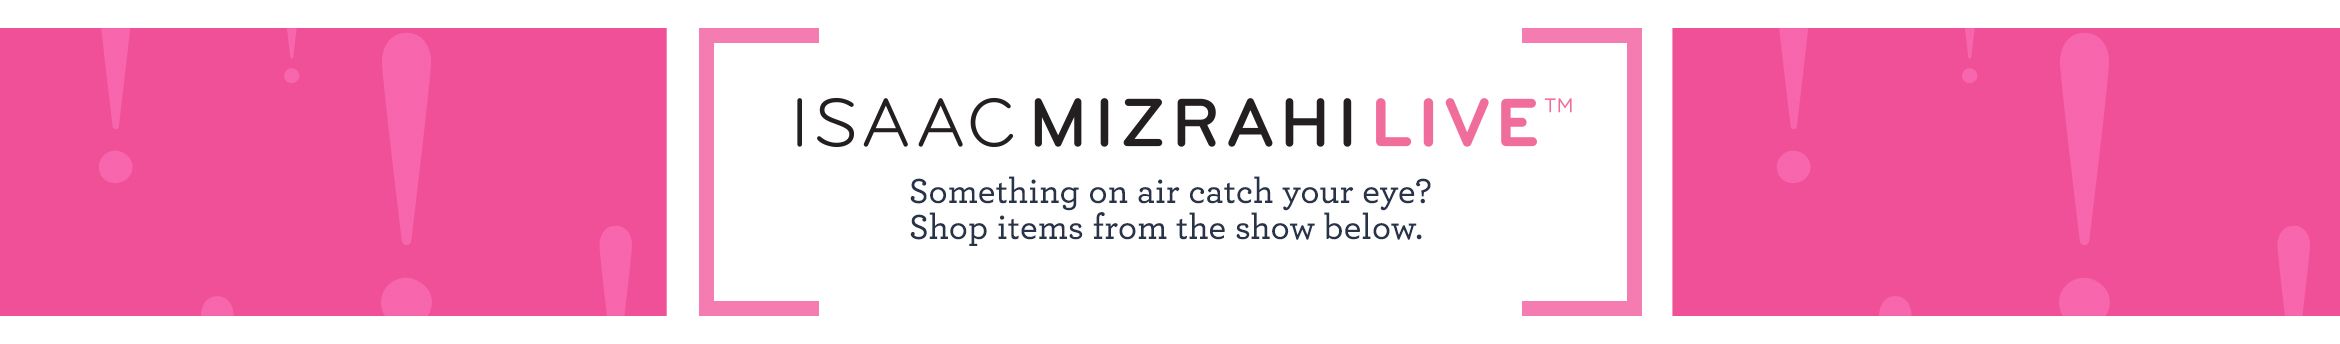 Isaac Mizrahi Live!™.  Something on air catch your eye? Shop items from the show below.